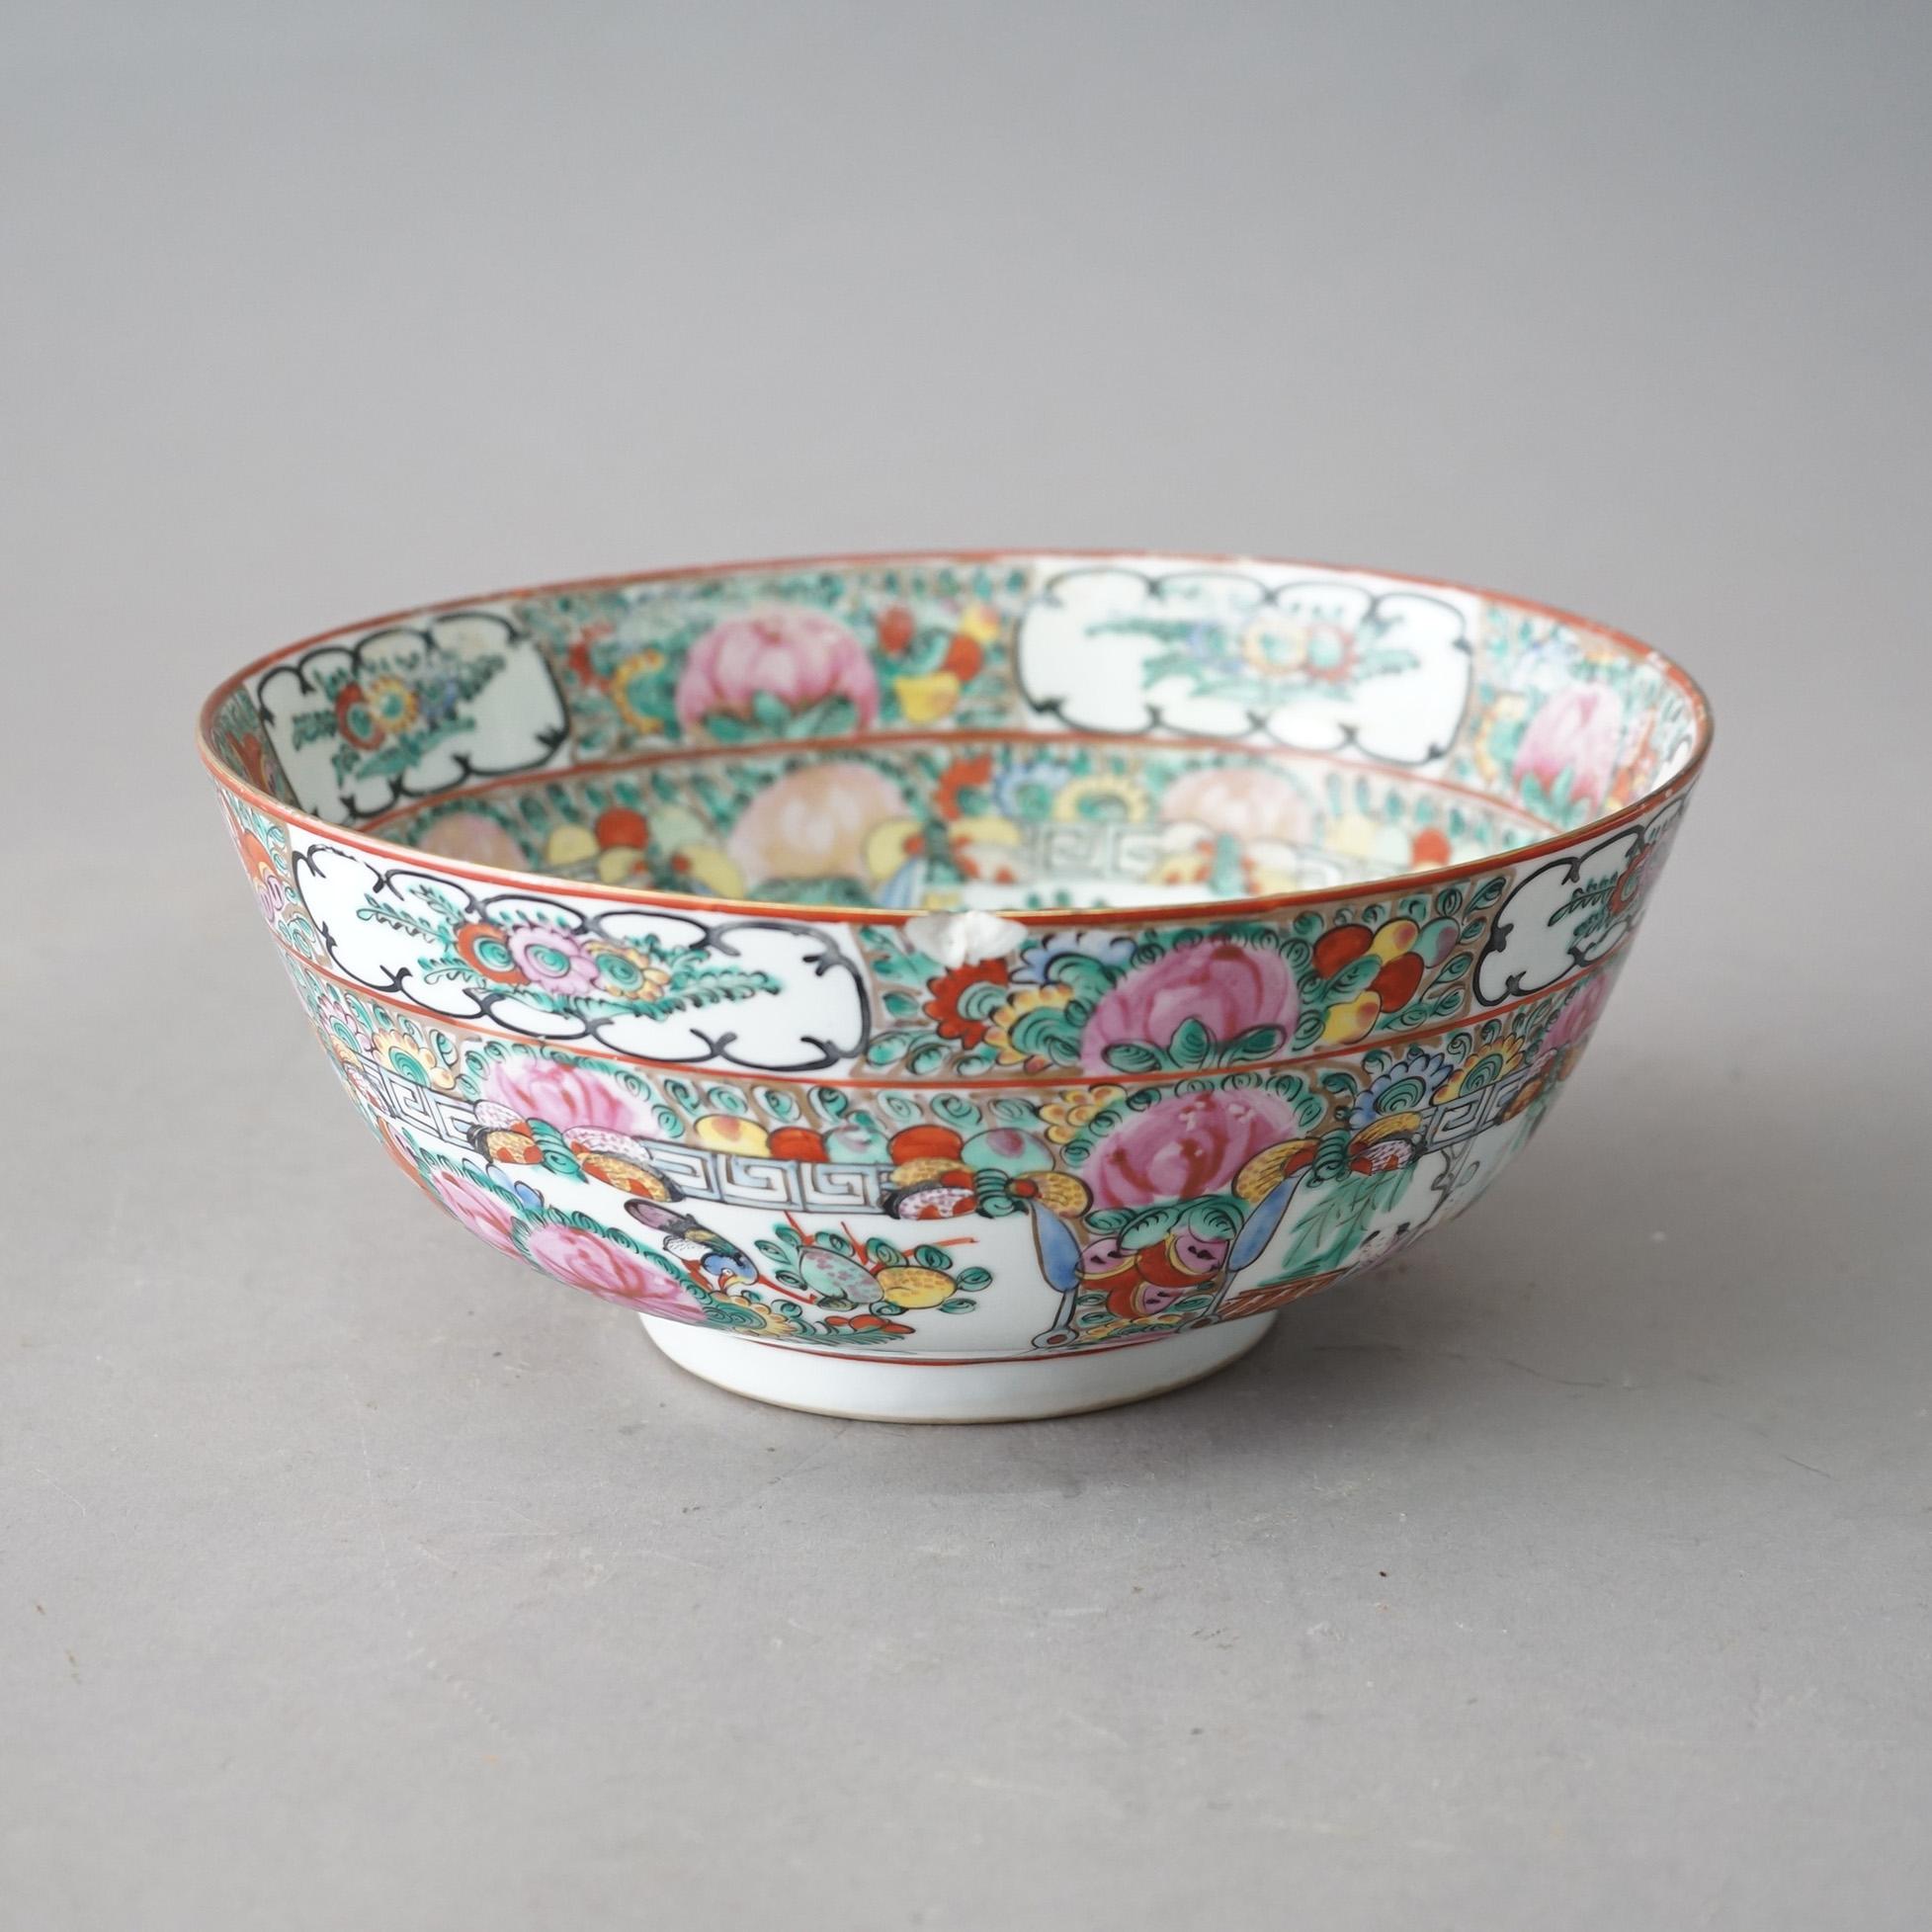 An antique Chinese Rose Medallion bowl offers porcelain construction with paneled genre scenes and garden elements, stamped on base as photographed, c1920

Measures - 4.5